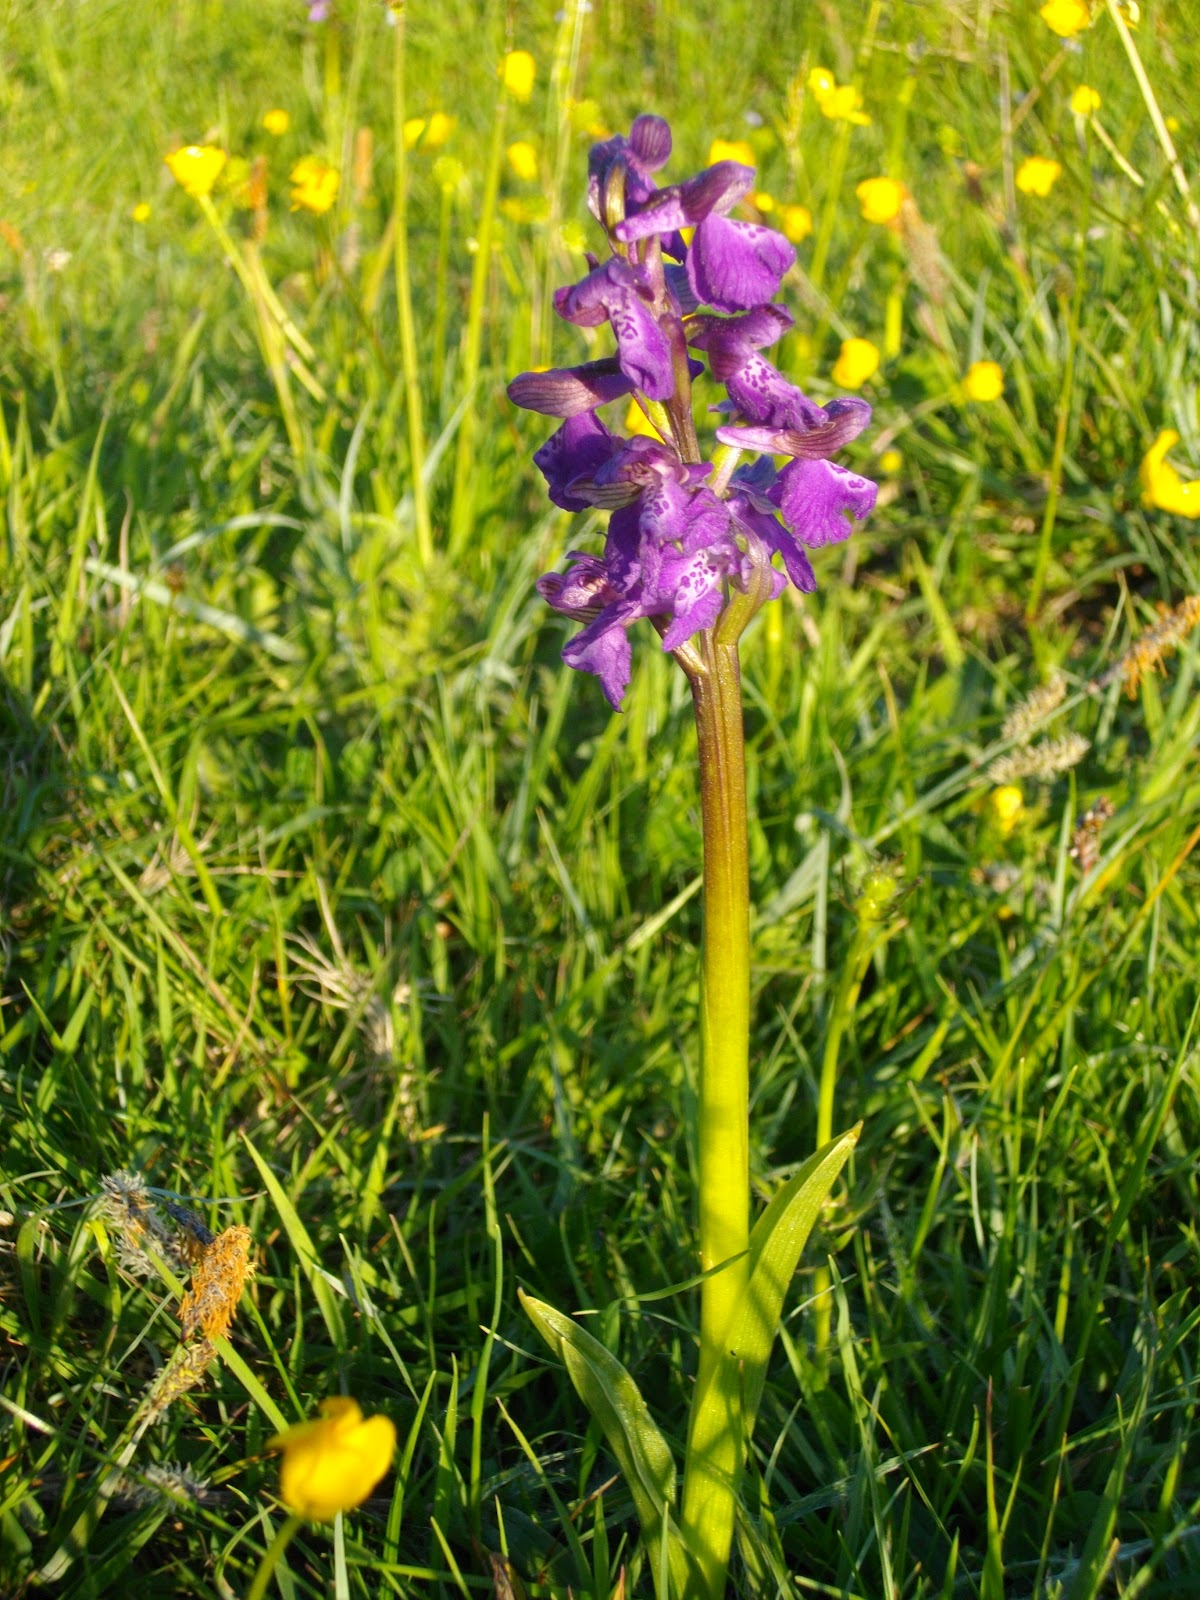 Birds and Beer: SOUTH NORFOLK: Green-winged Orchids
